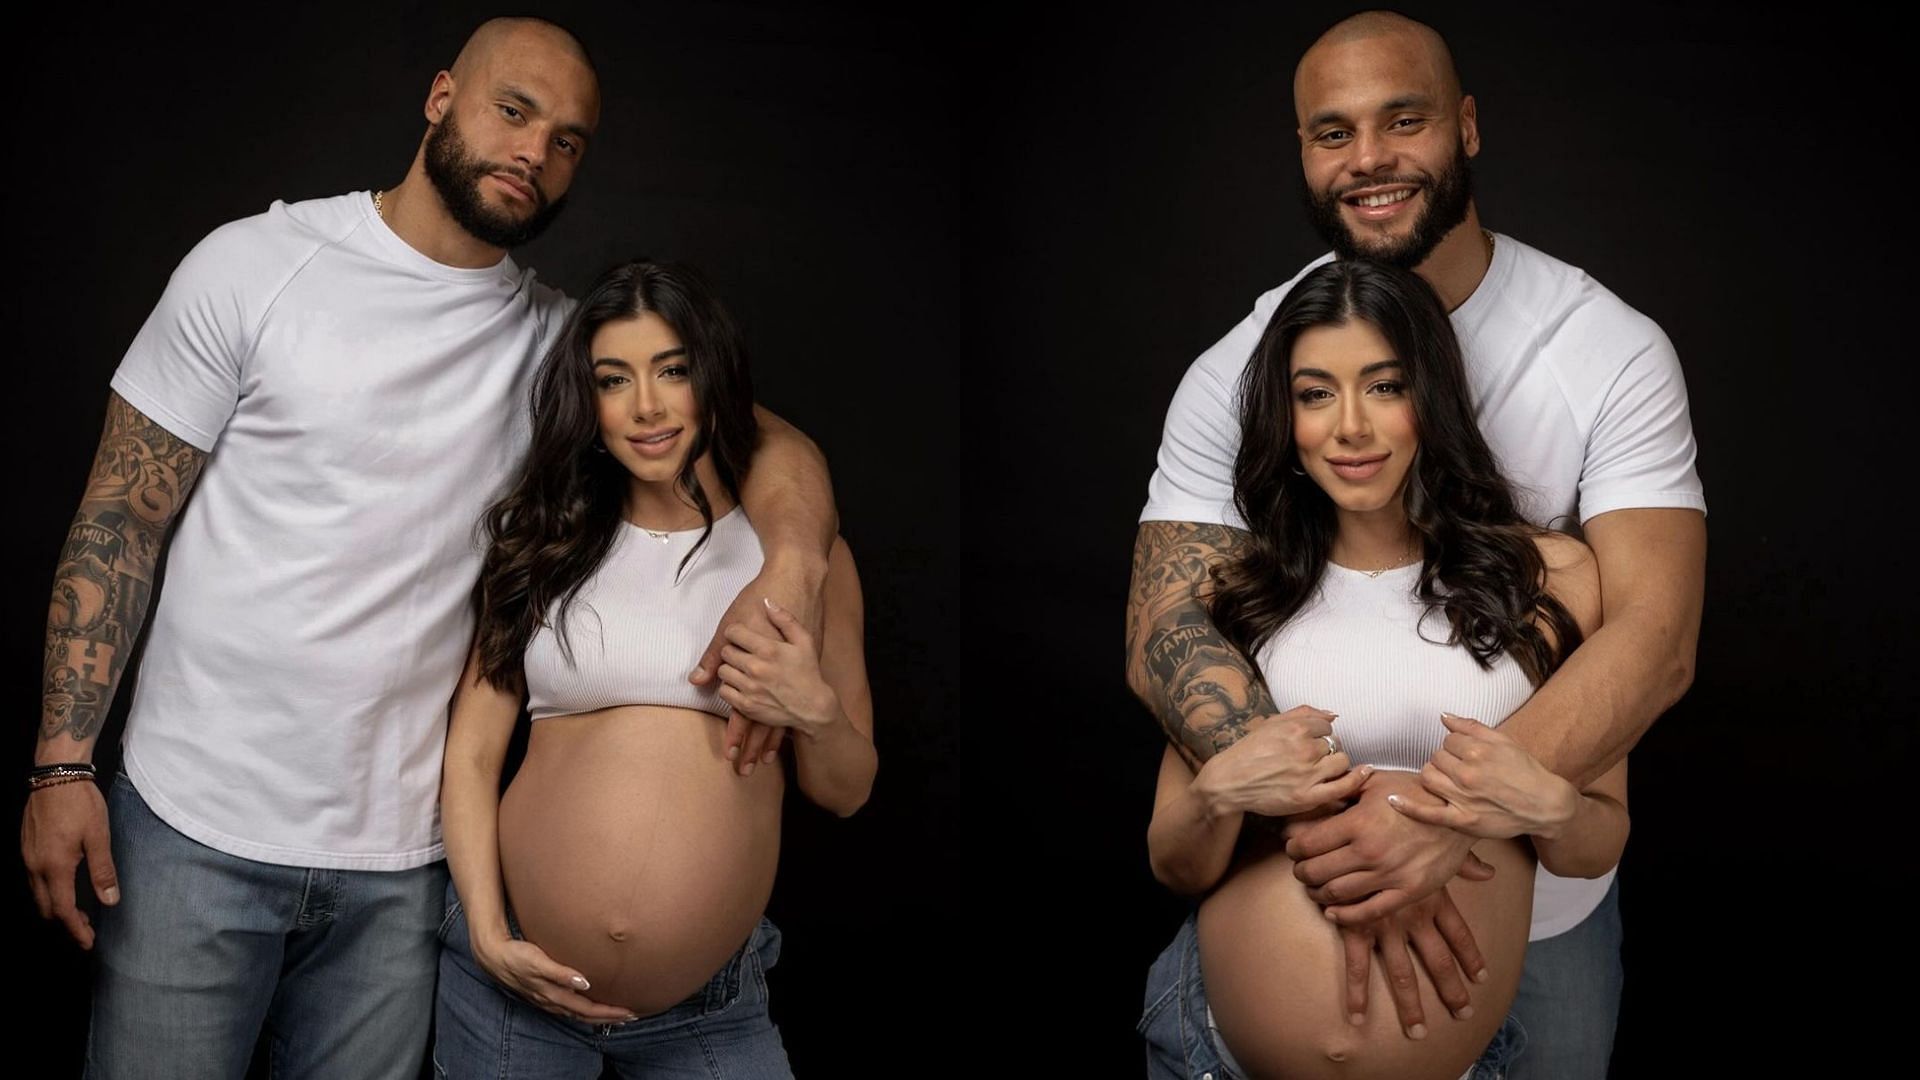 IN PHOTOS: Dak Prescott poses with Sarah Jane for wholesome pregnancy shoot as baby